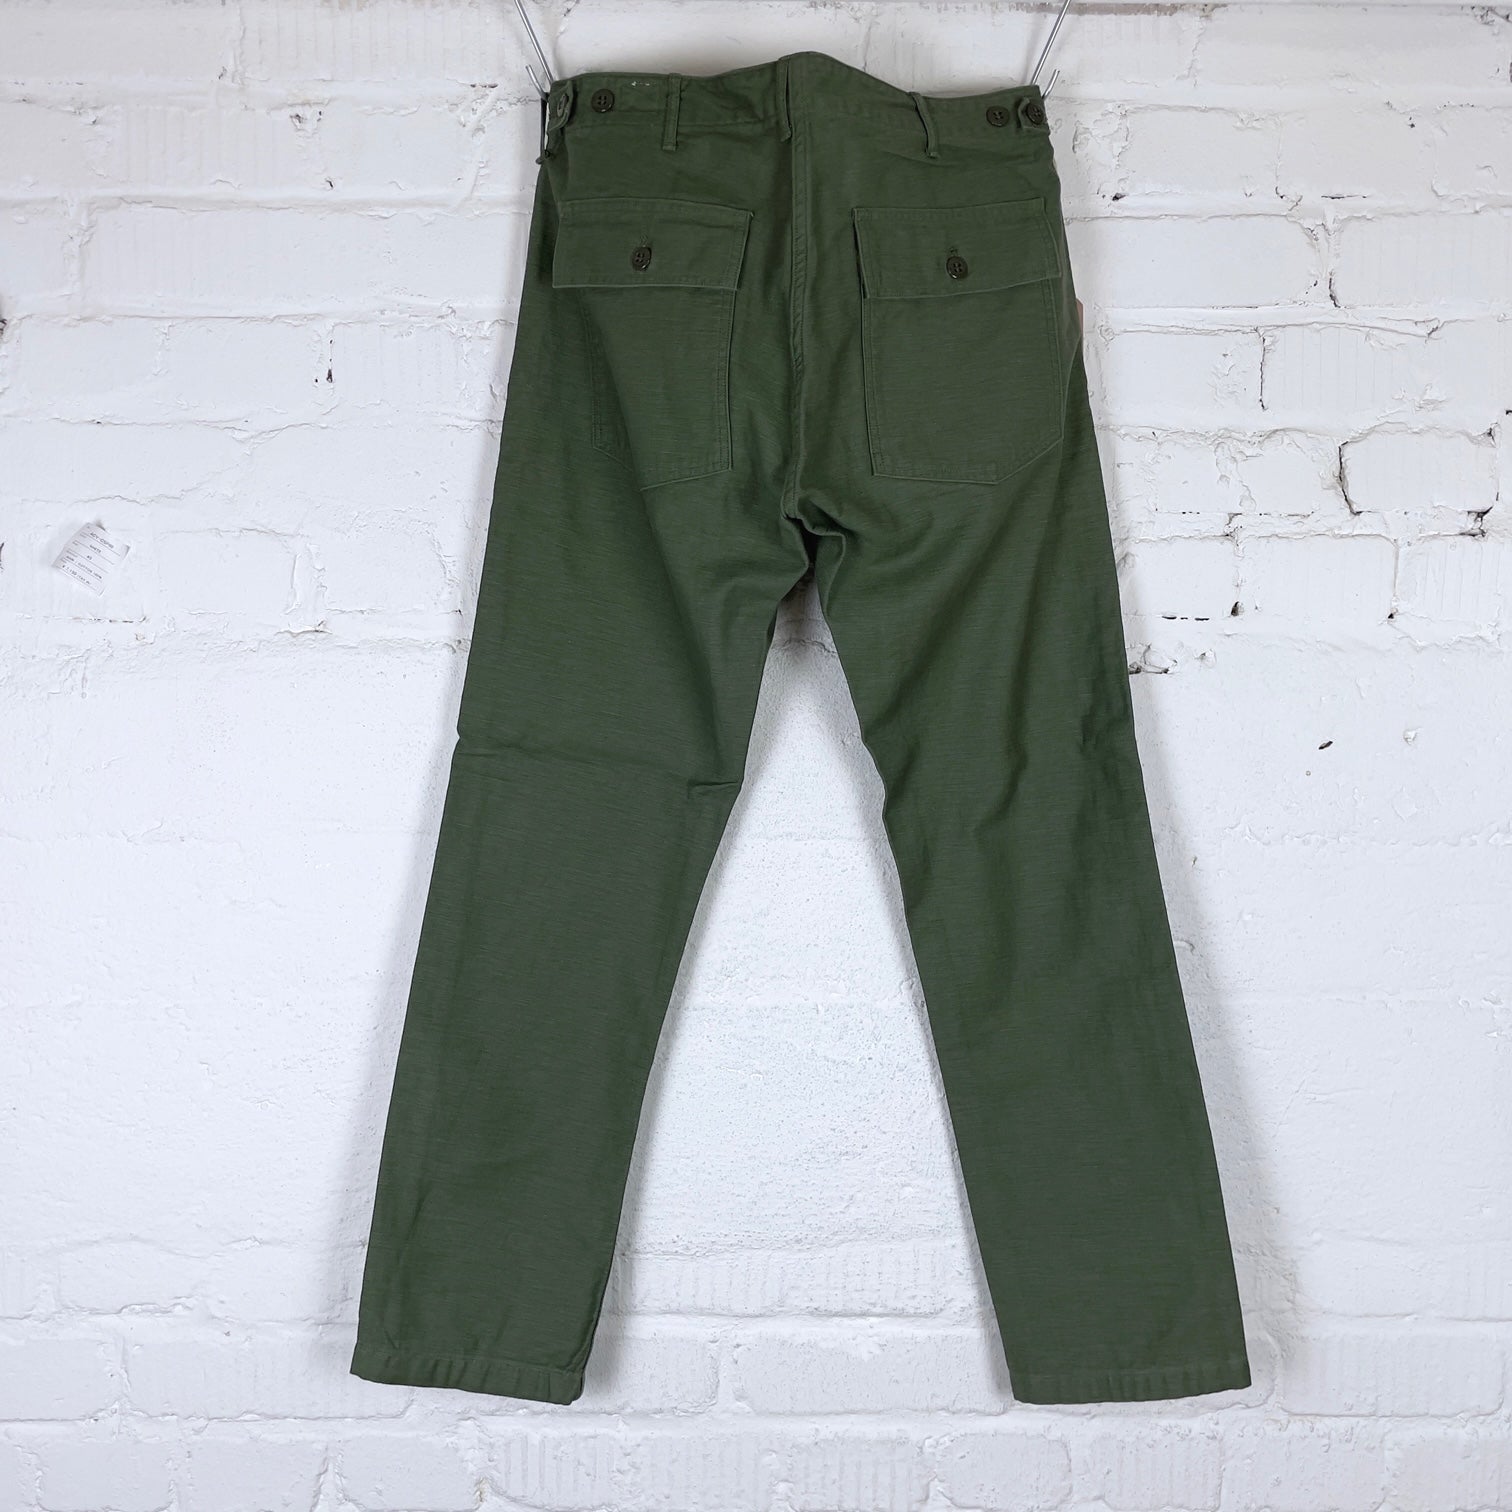 orslow | slim fit us army fatigue pants green